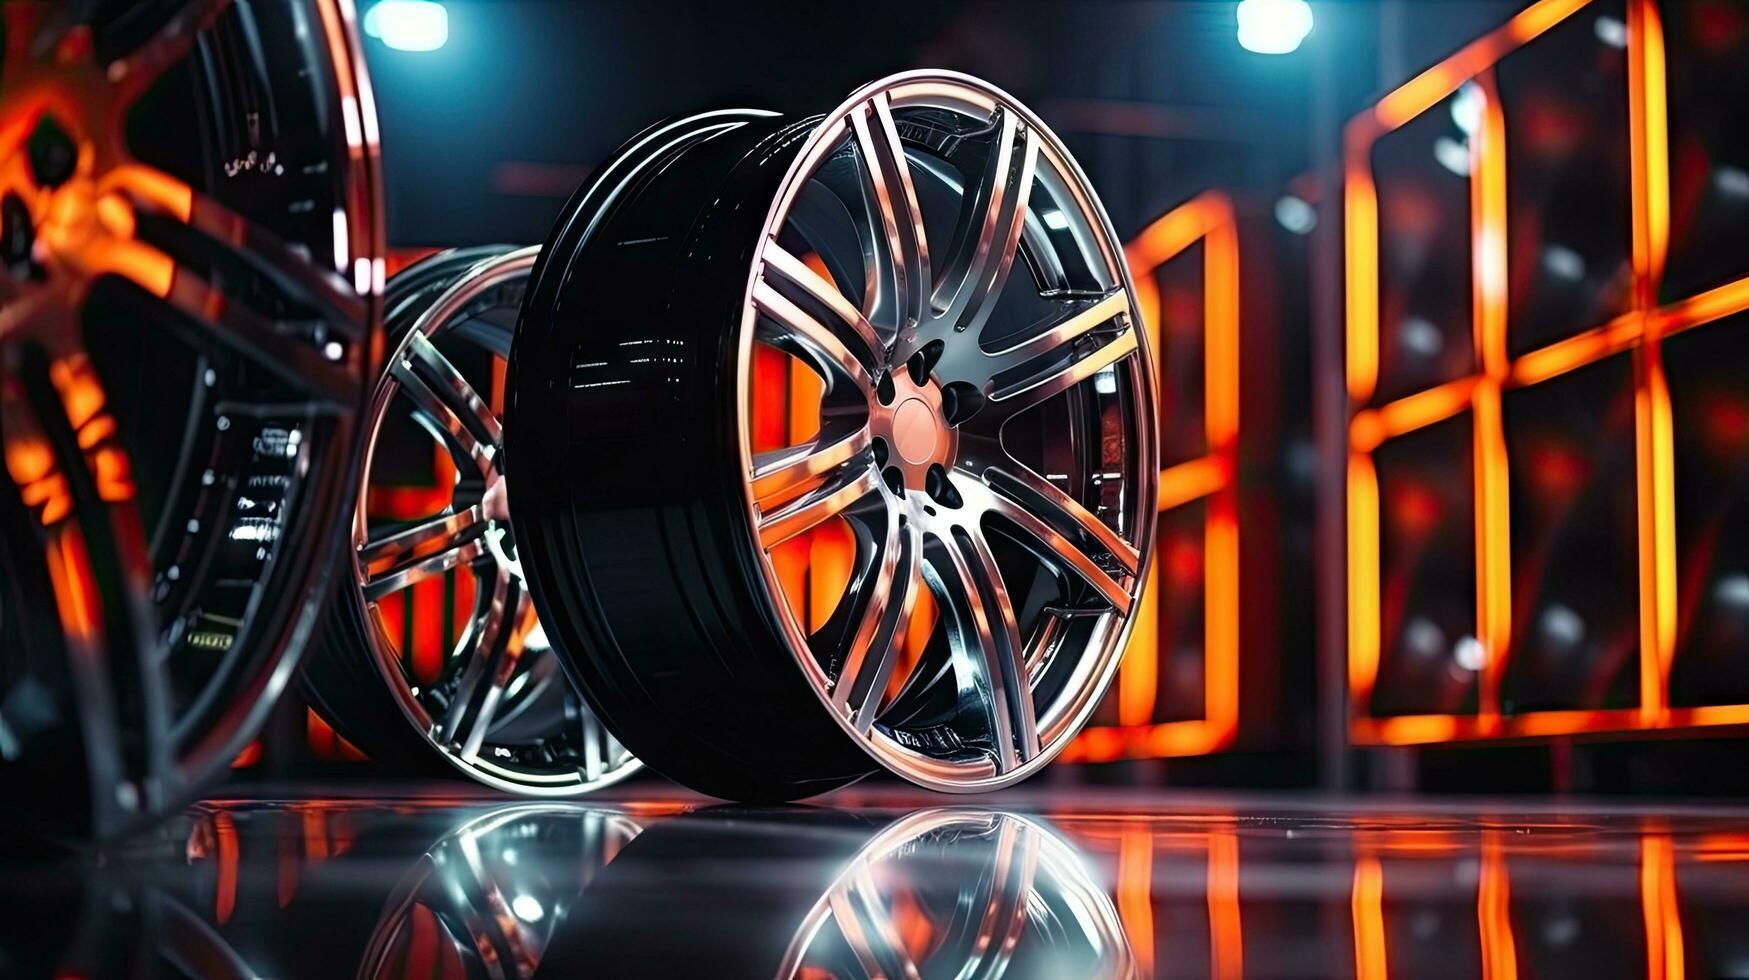 Alloy wheels, alloy wheels or alloy wheels, high performance car parts in car showrooms photo